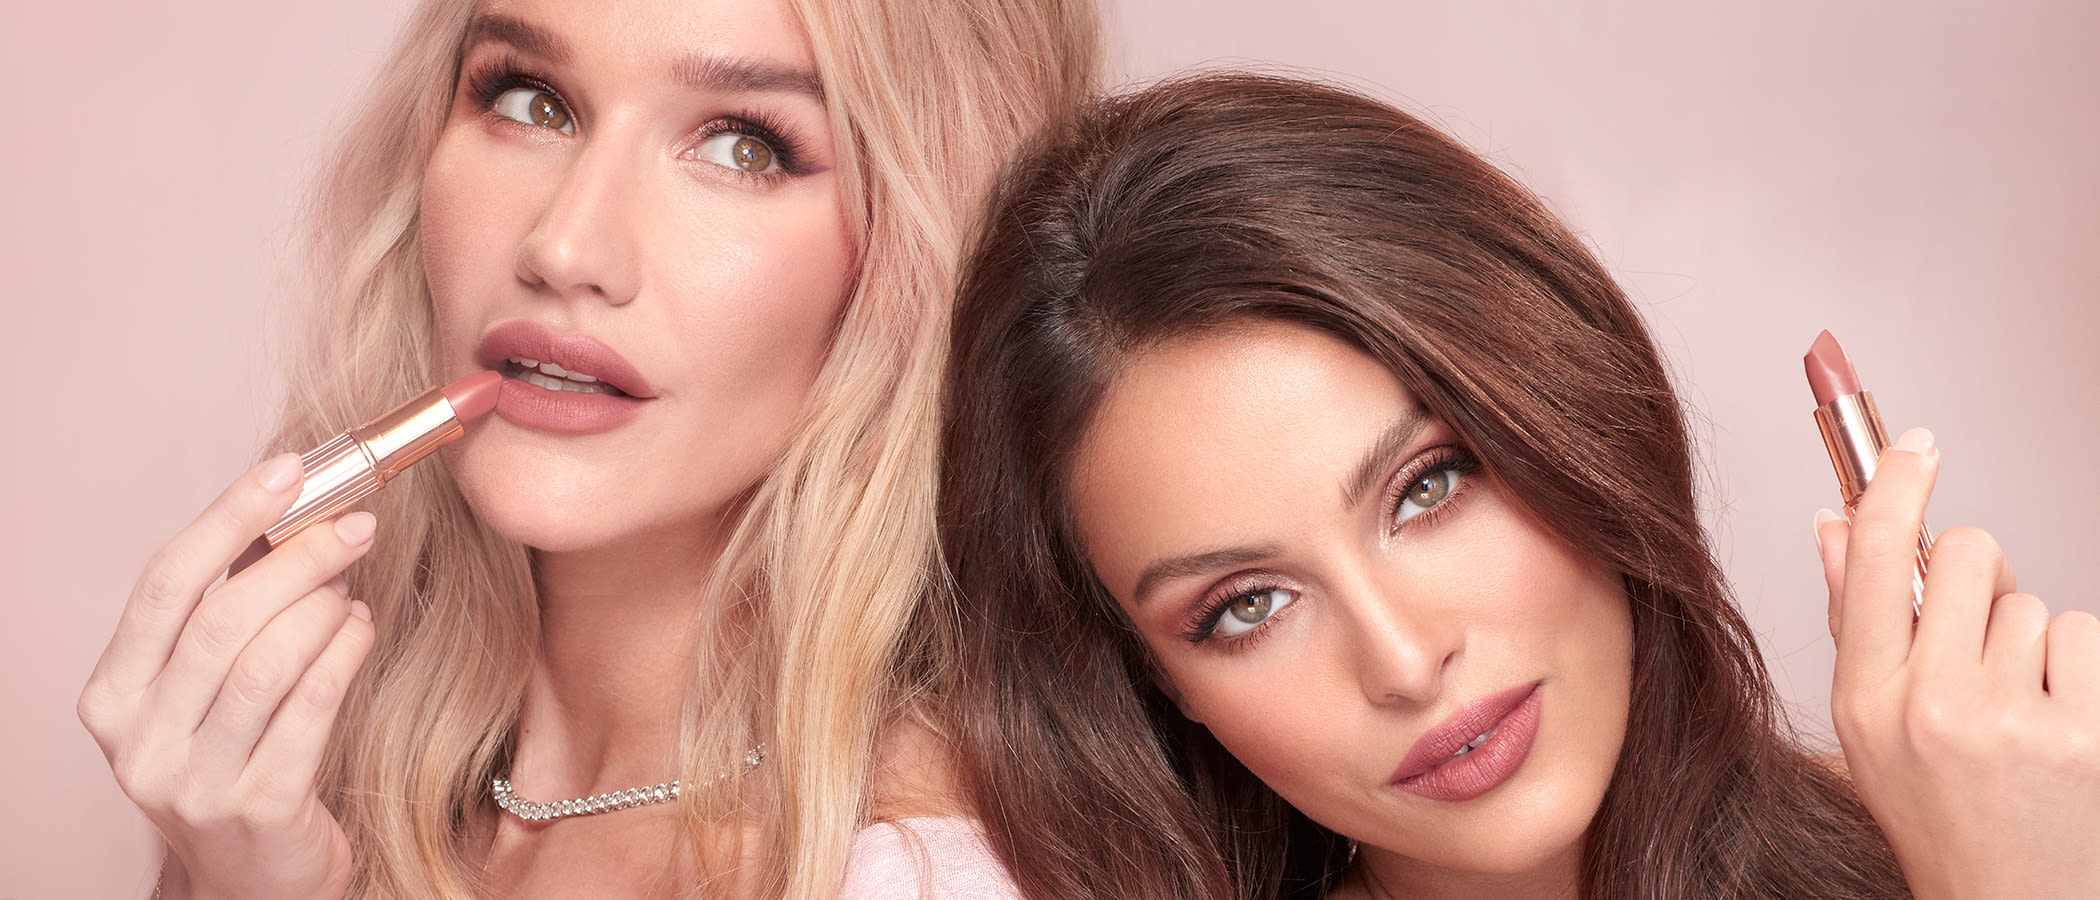 Sofia Tilbury with a brunette model, with both wearing glowy nude pink, make while holding nude pink lipsticks.